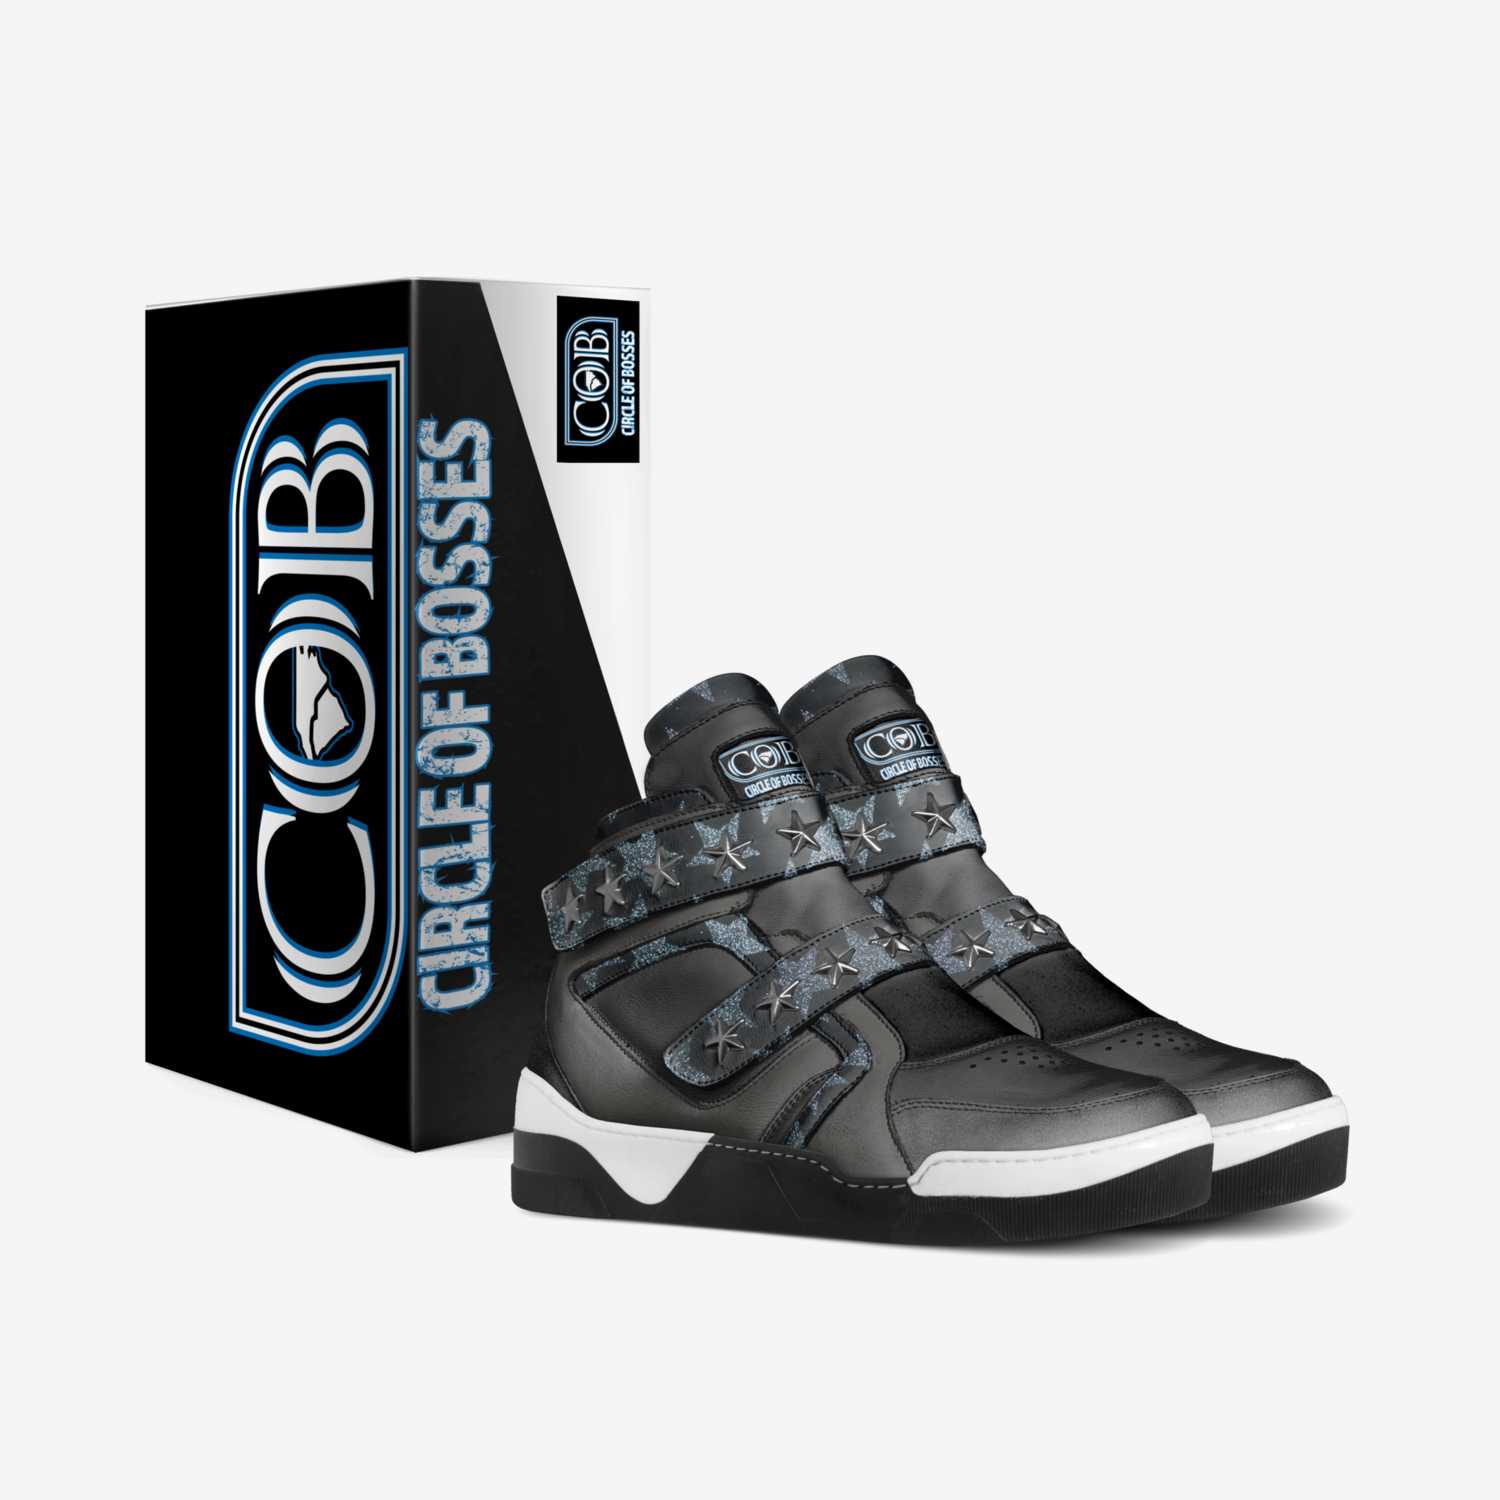 COBC3 custom made in Italy shoes by Tragman Jones | Box view